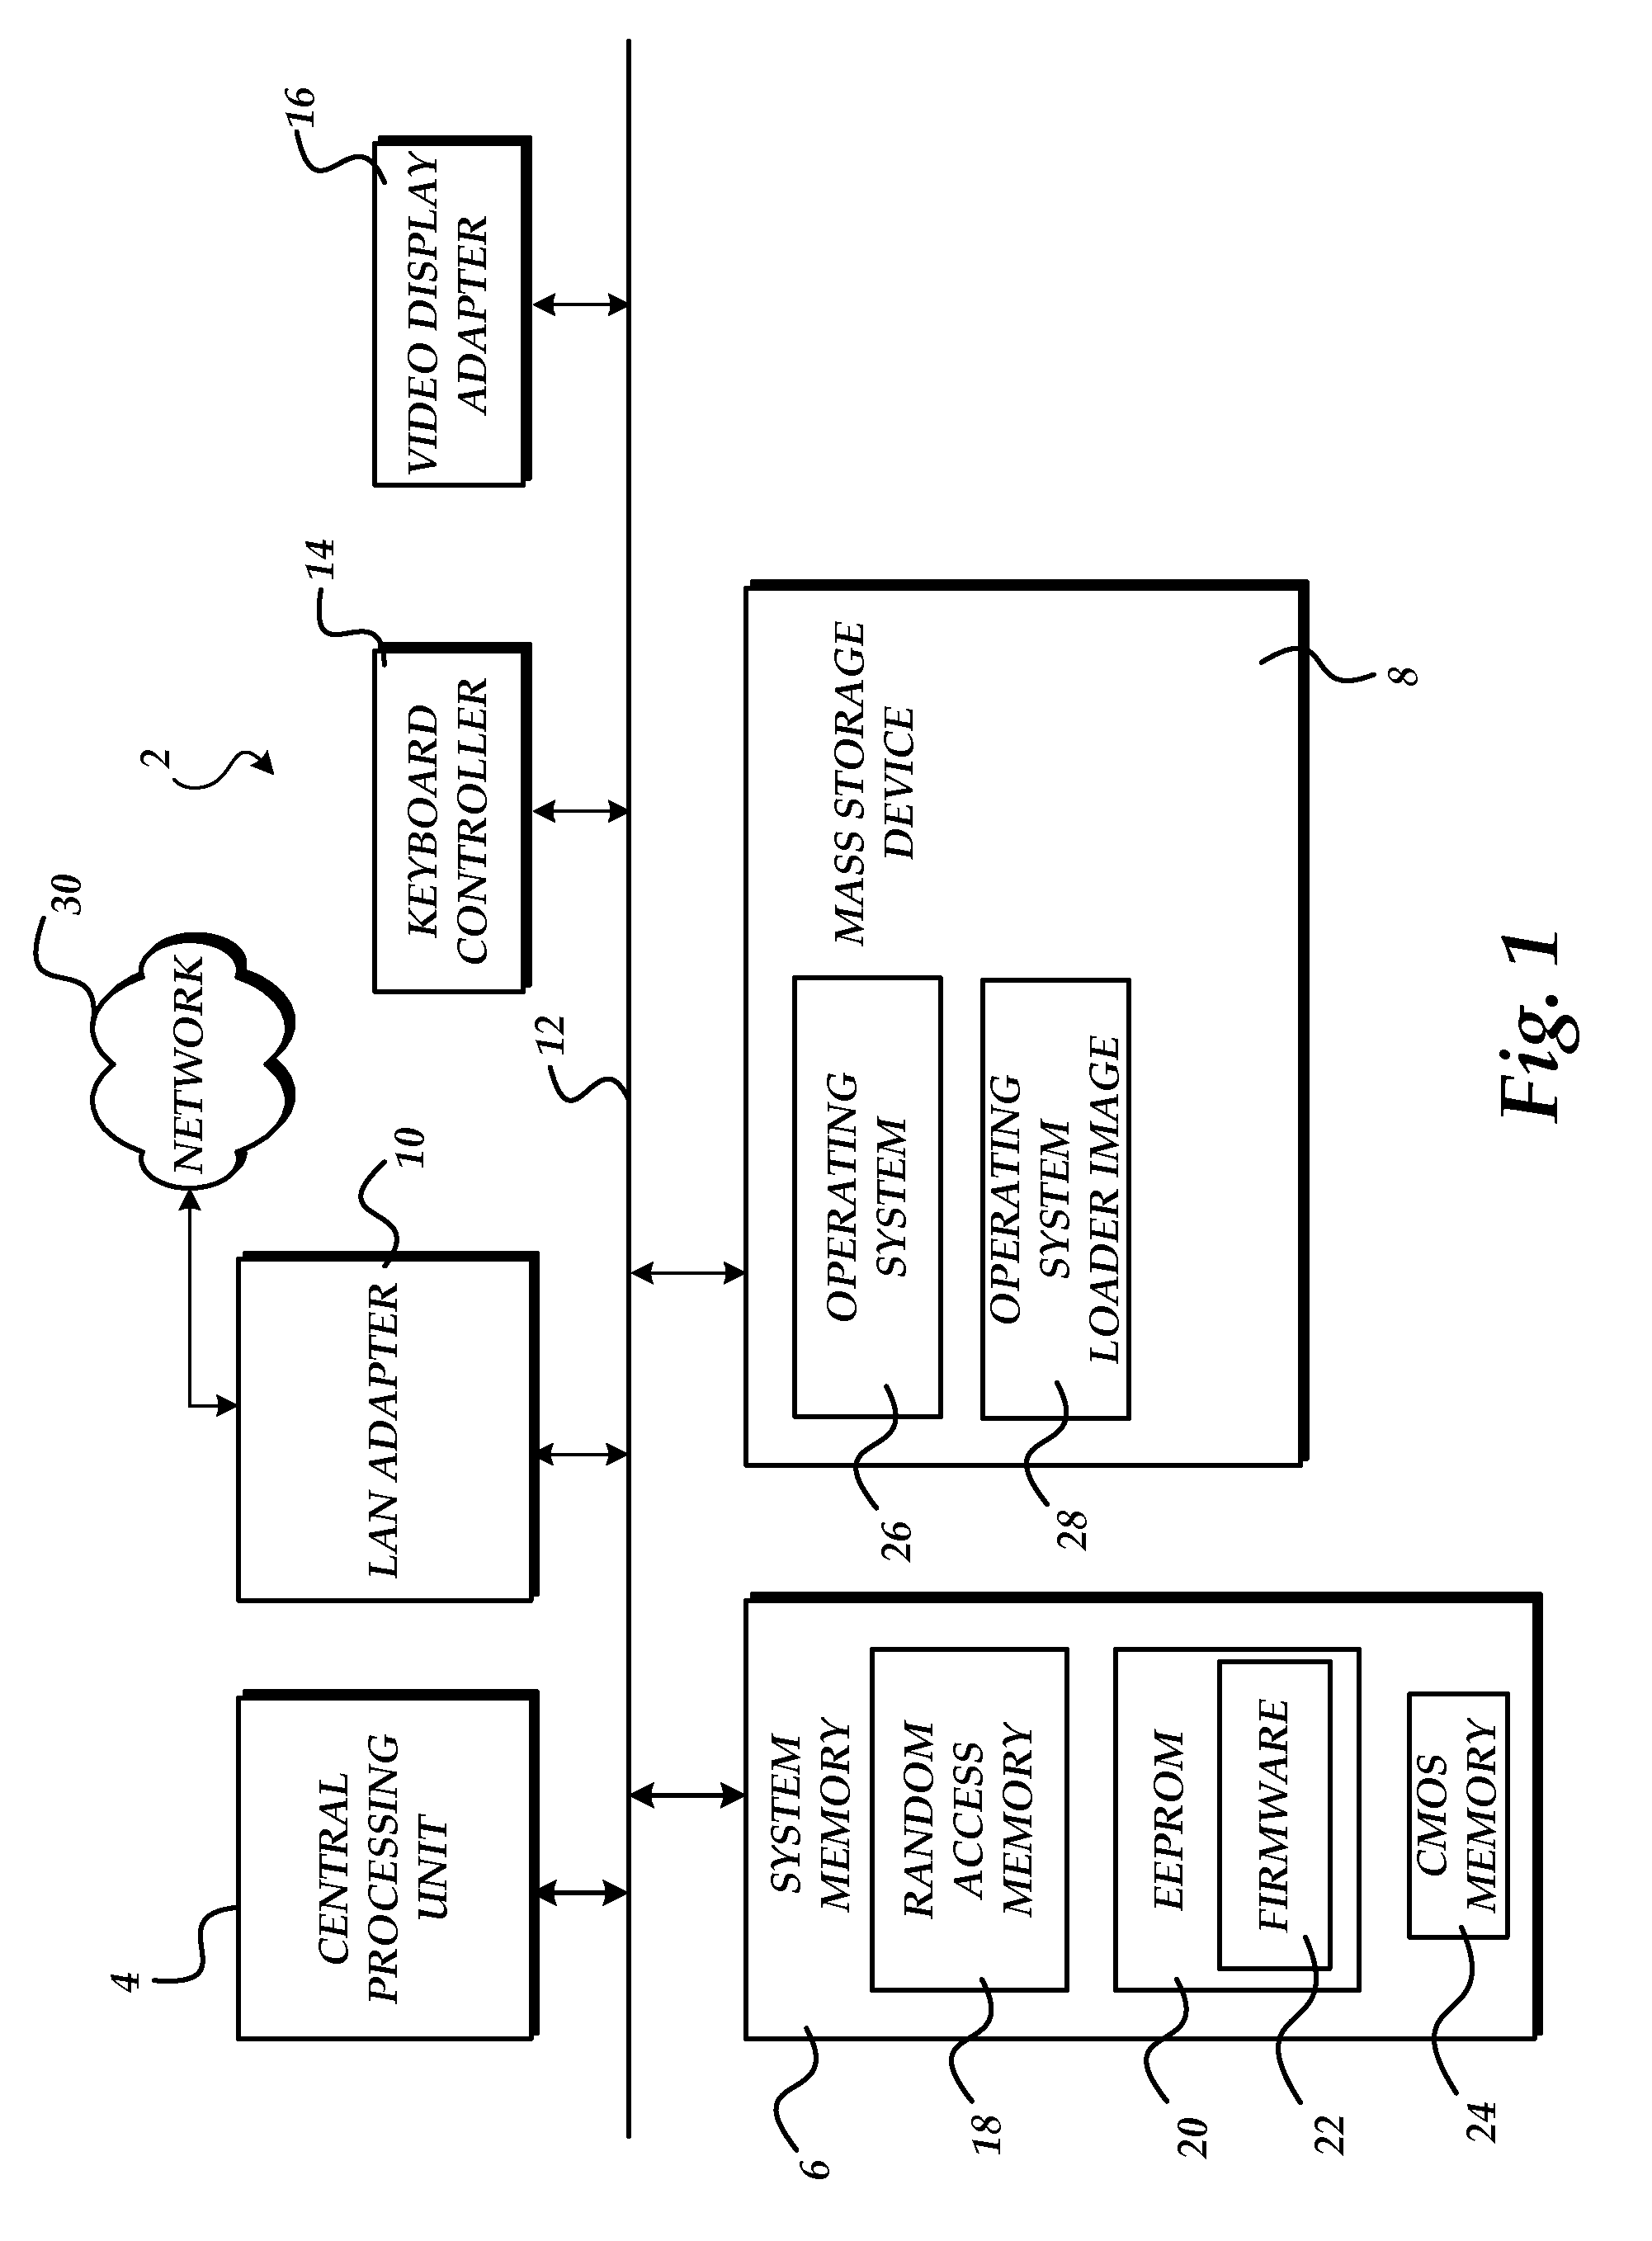 Method, system, and apparatus for providing generic database services within an extensible firmware interface environment